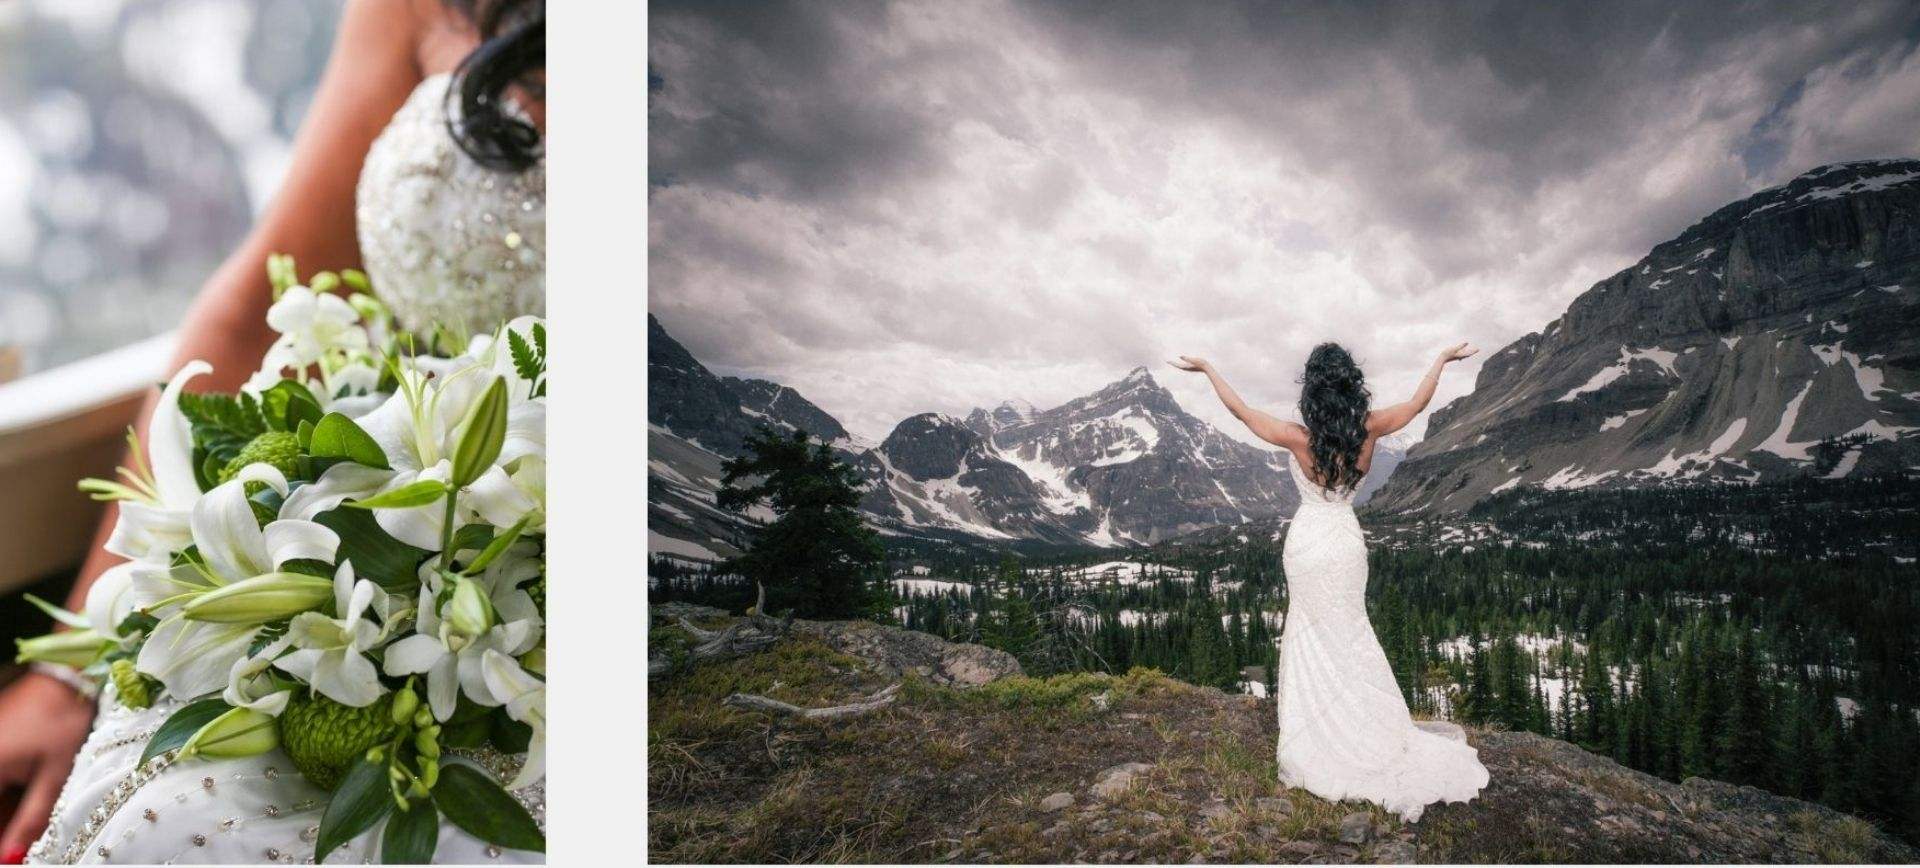 heli wedding adventure in canada, rocky mountains - epic portrait of bride in the wilderness